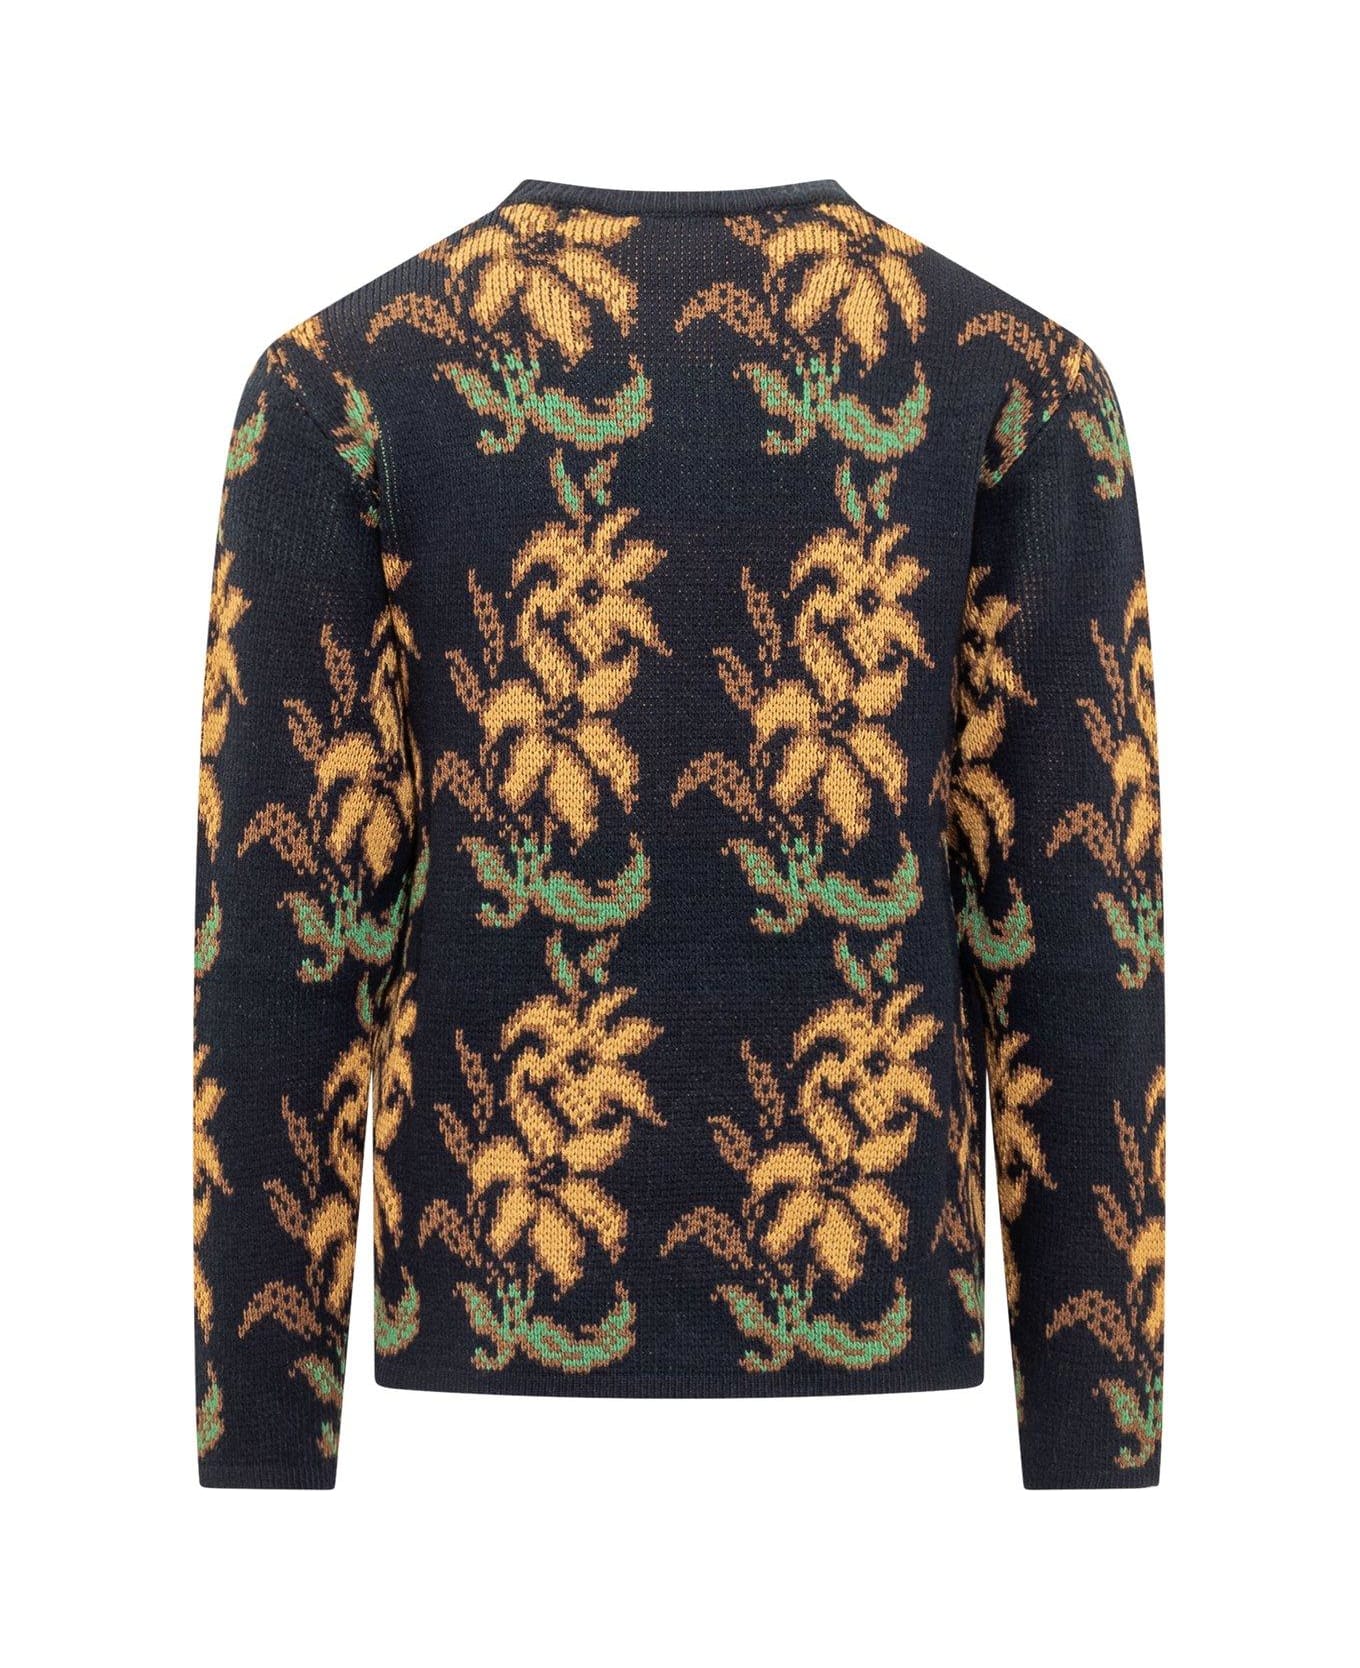 Etro Floral Intarsia Knitted Crewneck Jumper - C